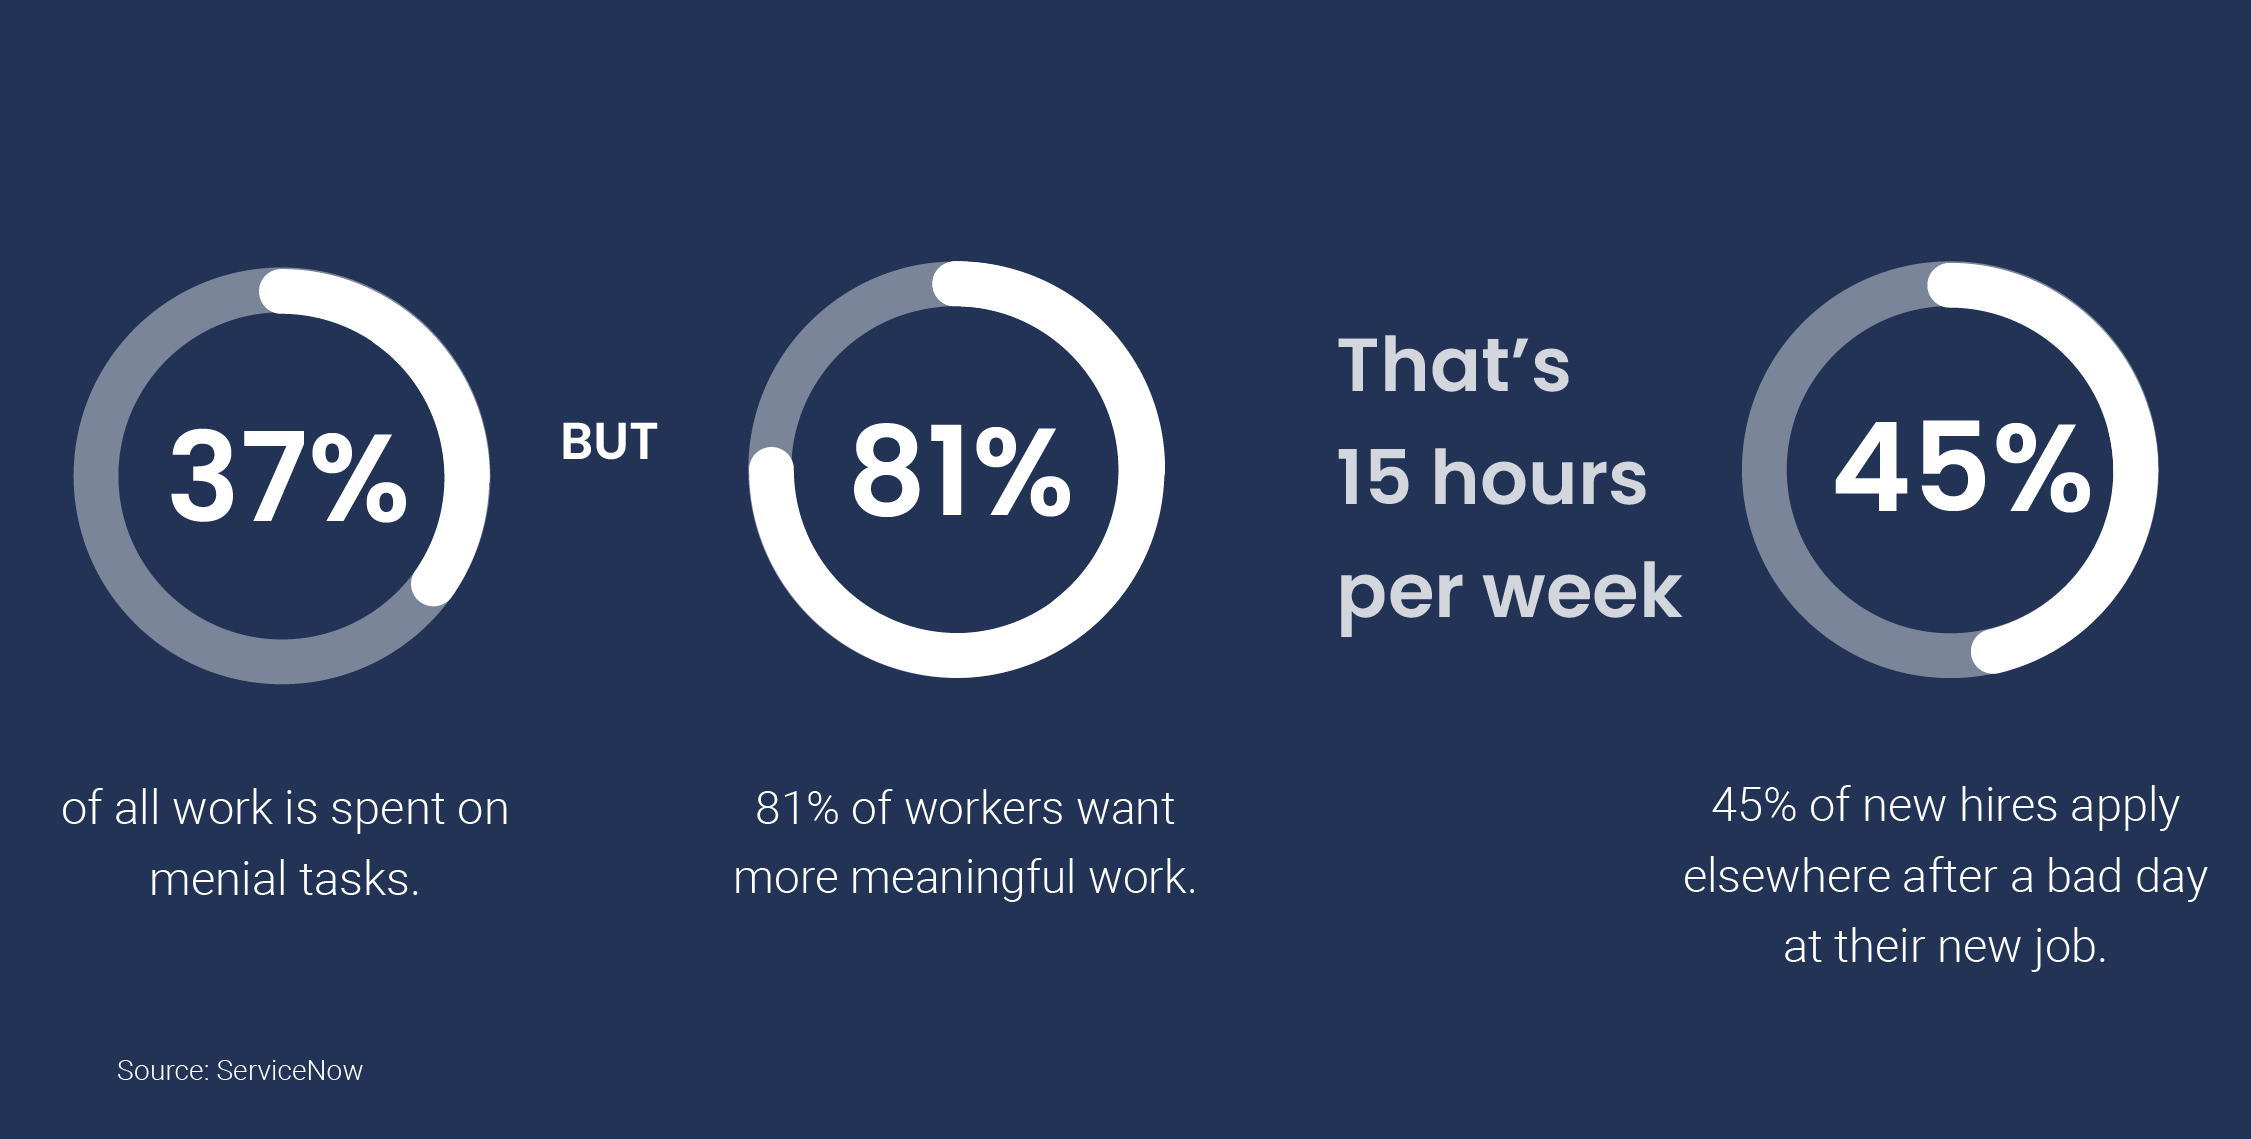 The case in numbers to make work more meaningful